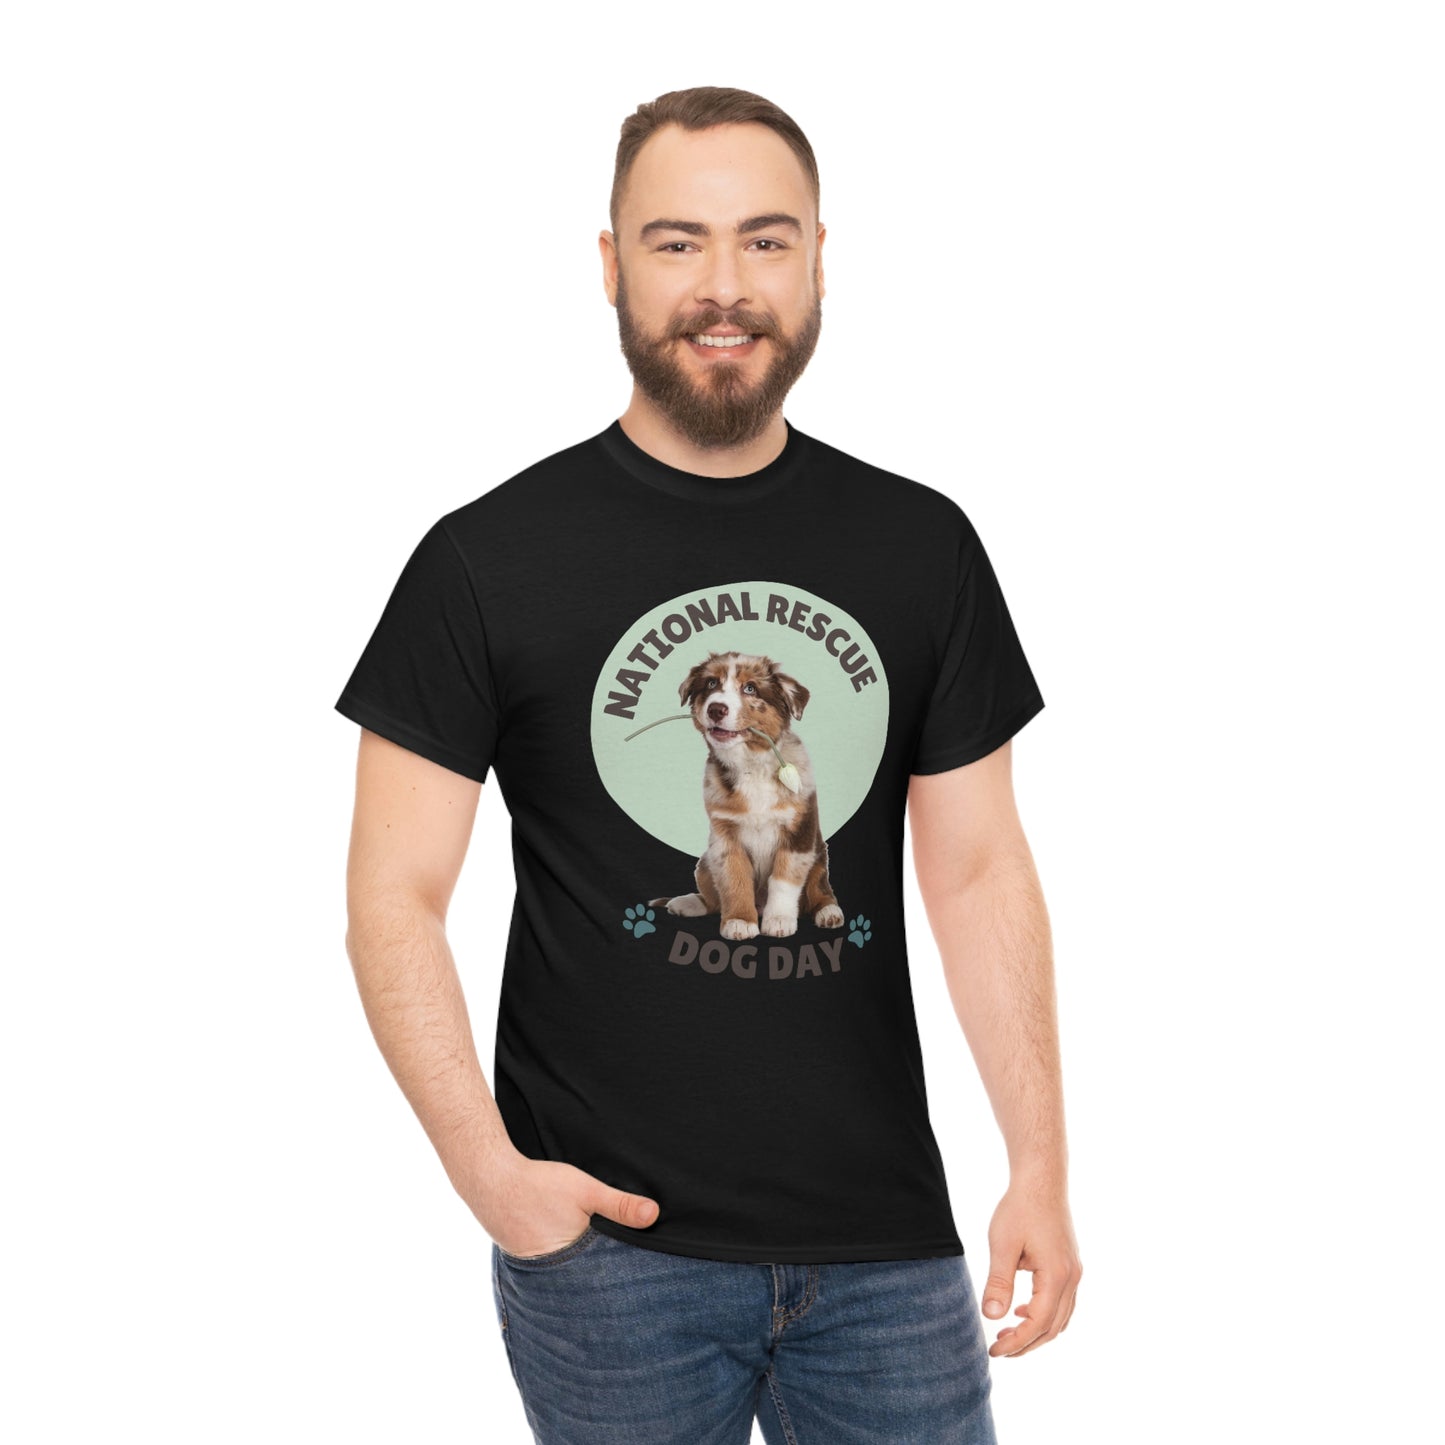 National Rescue Dog Day with paws design Graphic tee shirt